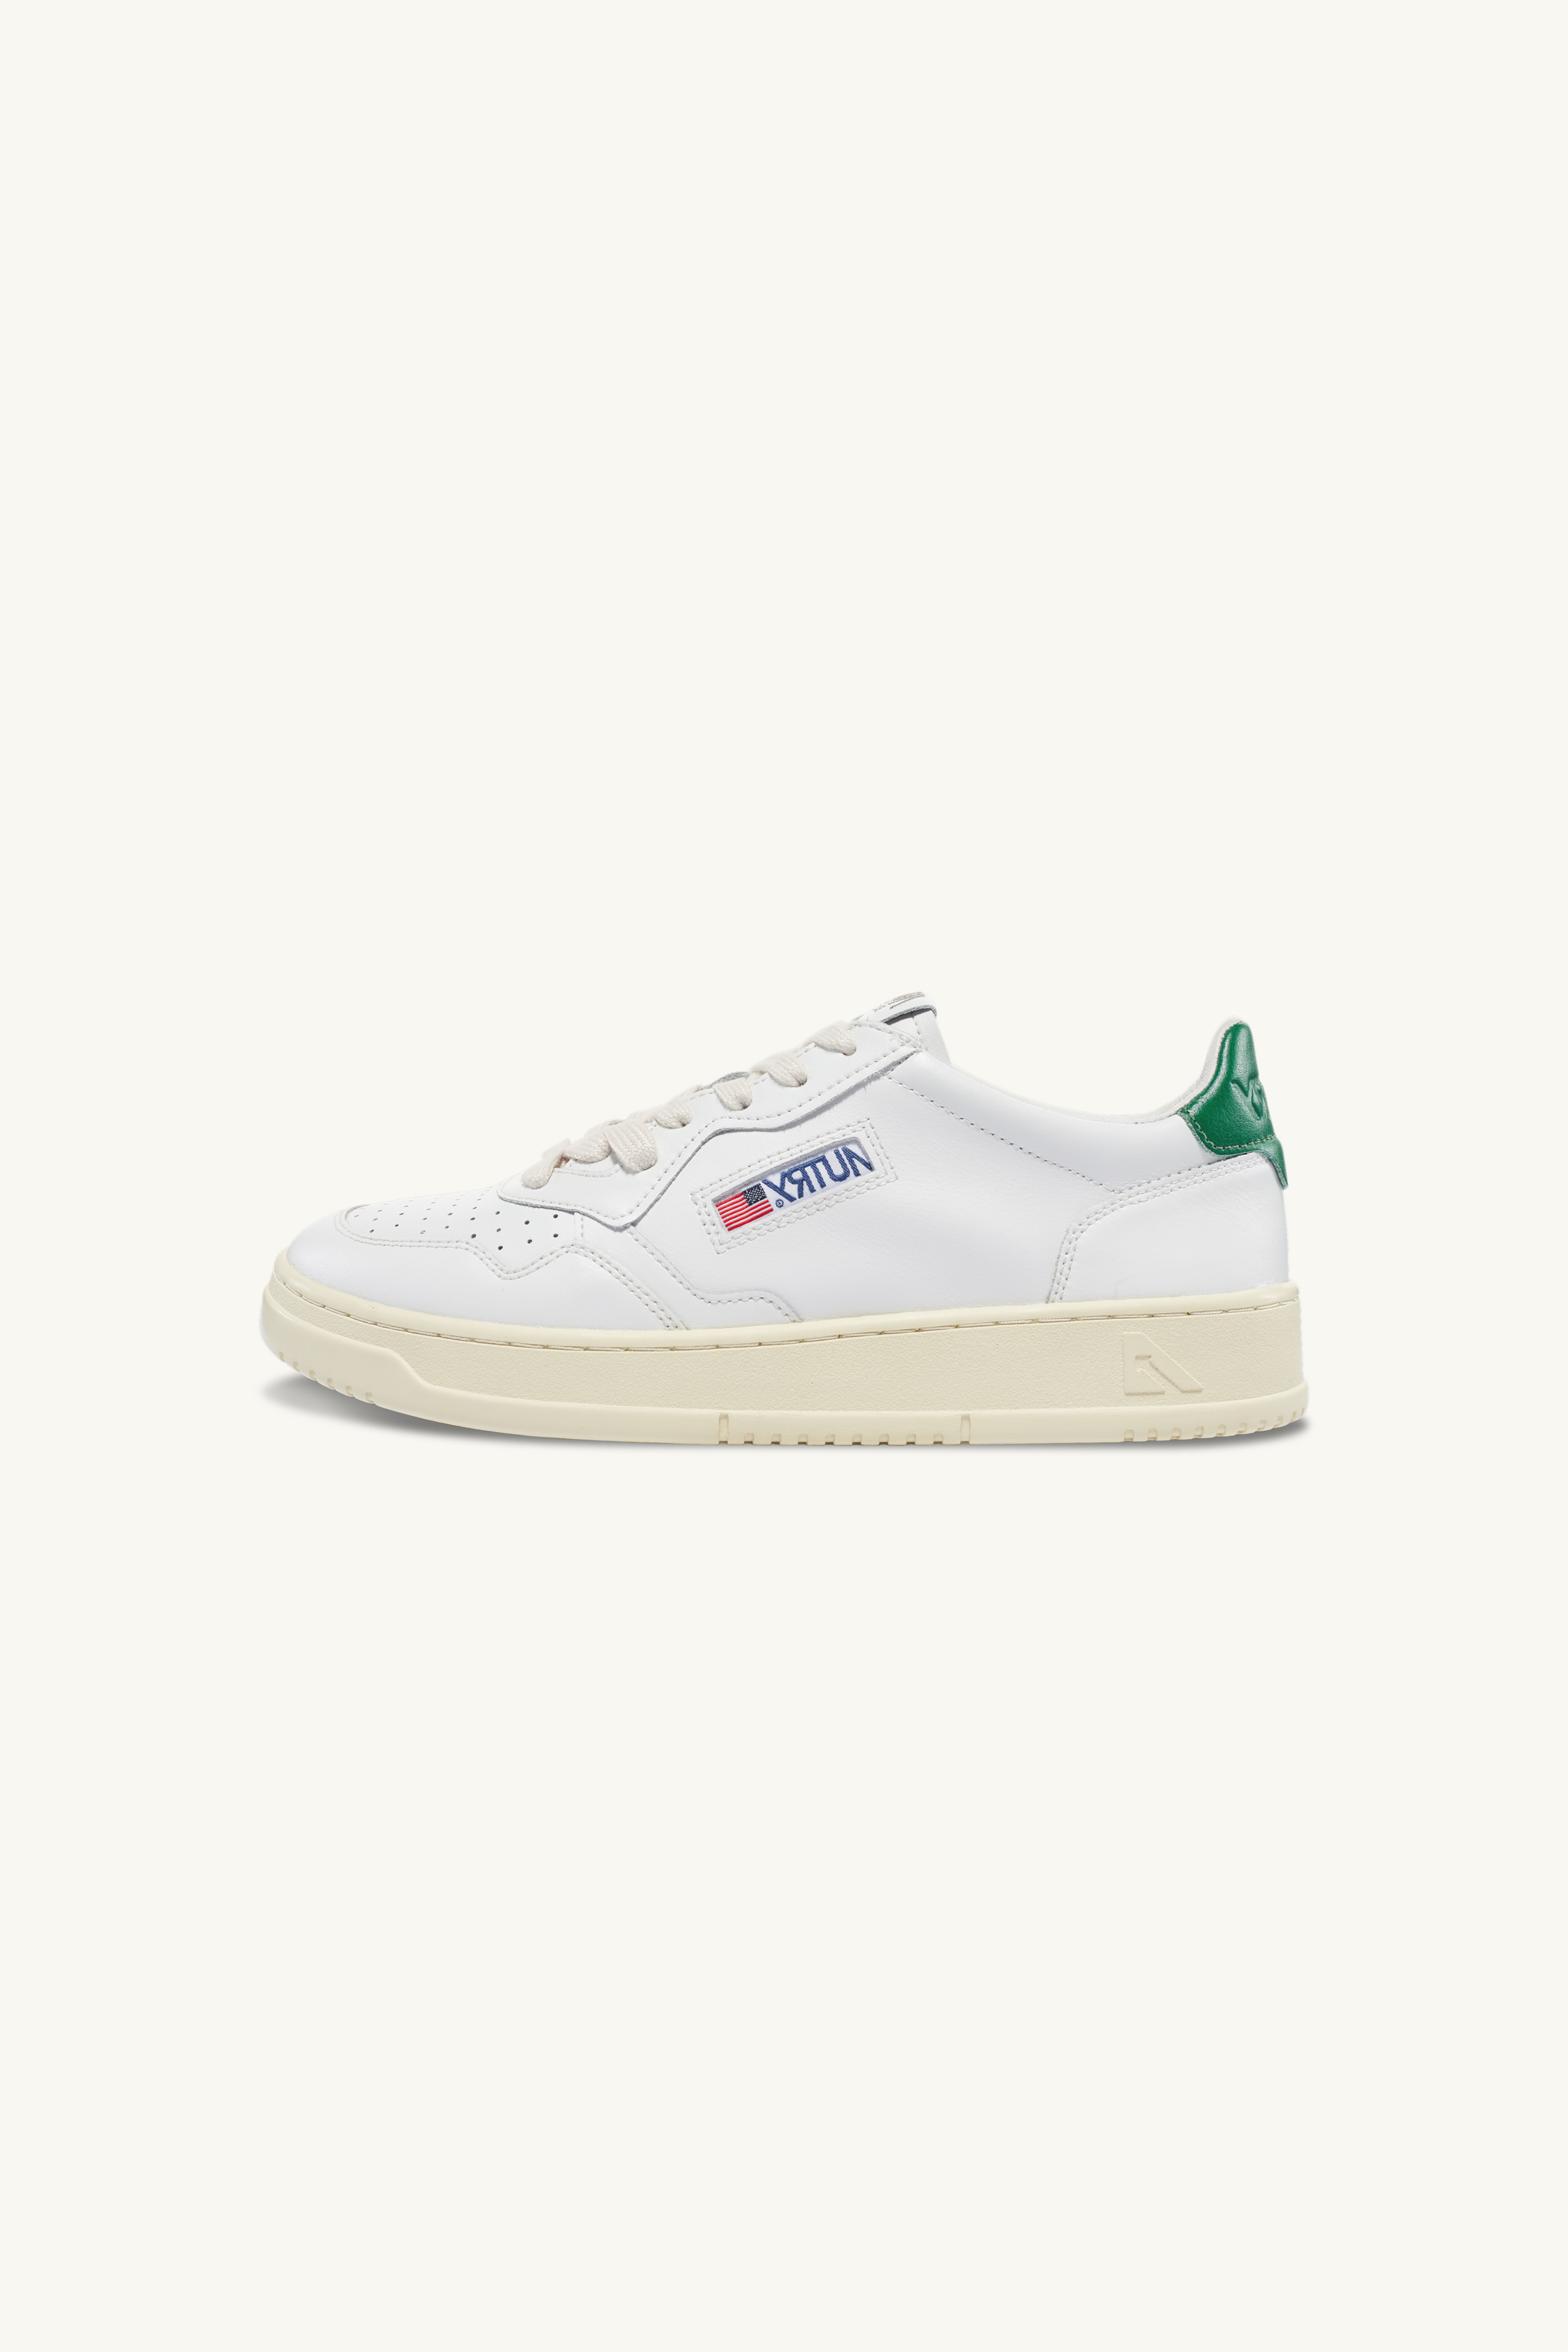 AULW-LL20 - MEDALIST LOW SNEAKERS IN LEATHER WHITE AND GREEN